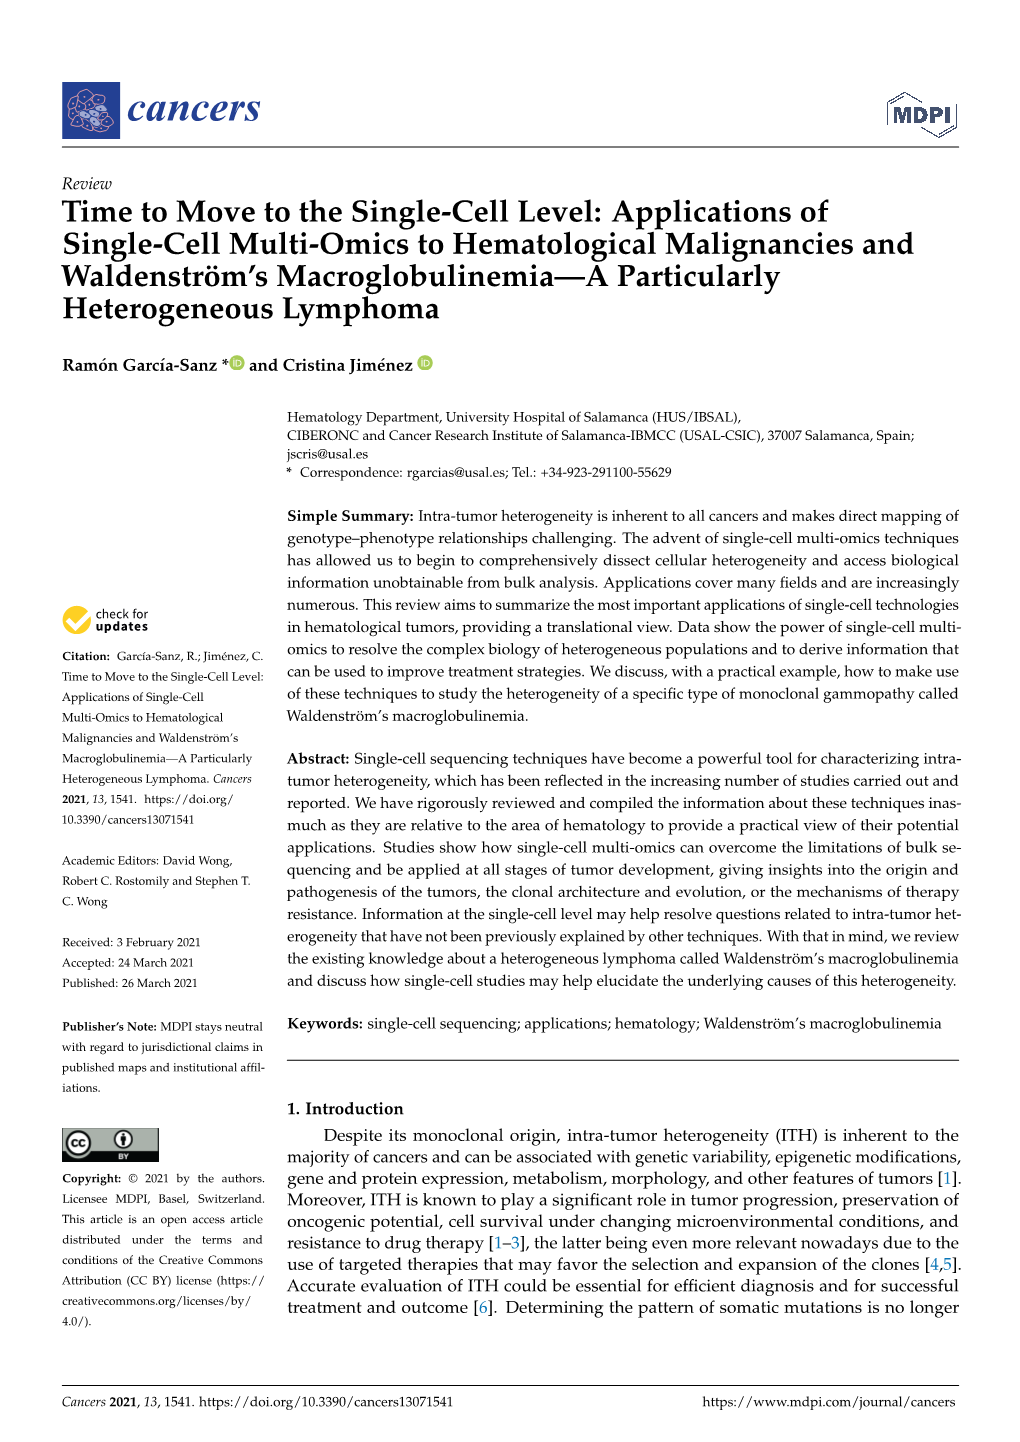 Applications of Single-Cell Multi-Omics to Hematological Malignancies and Waldenström’S Macroglobulinemia—A Particularly Heterogeneous Lymphoma